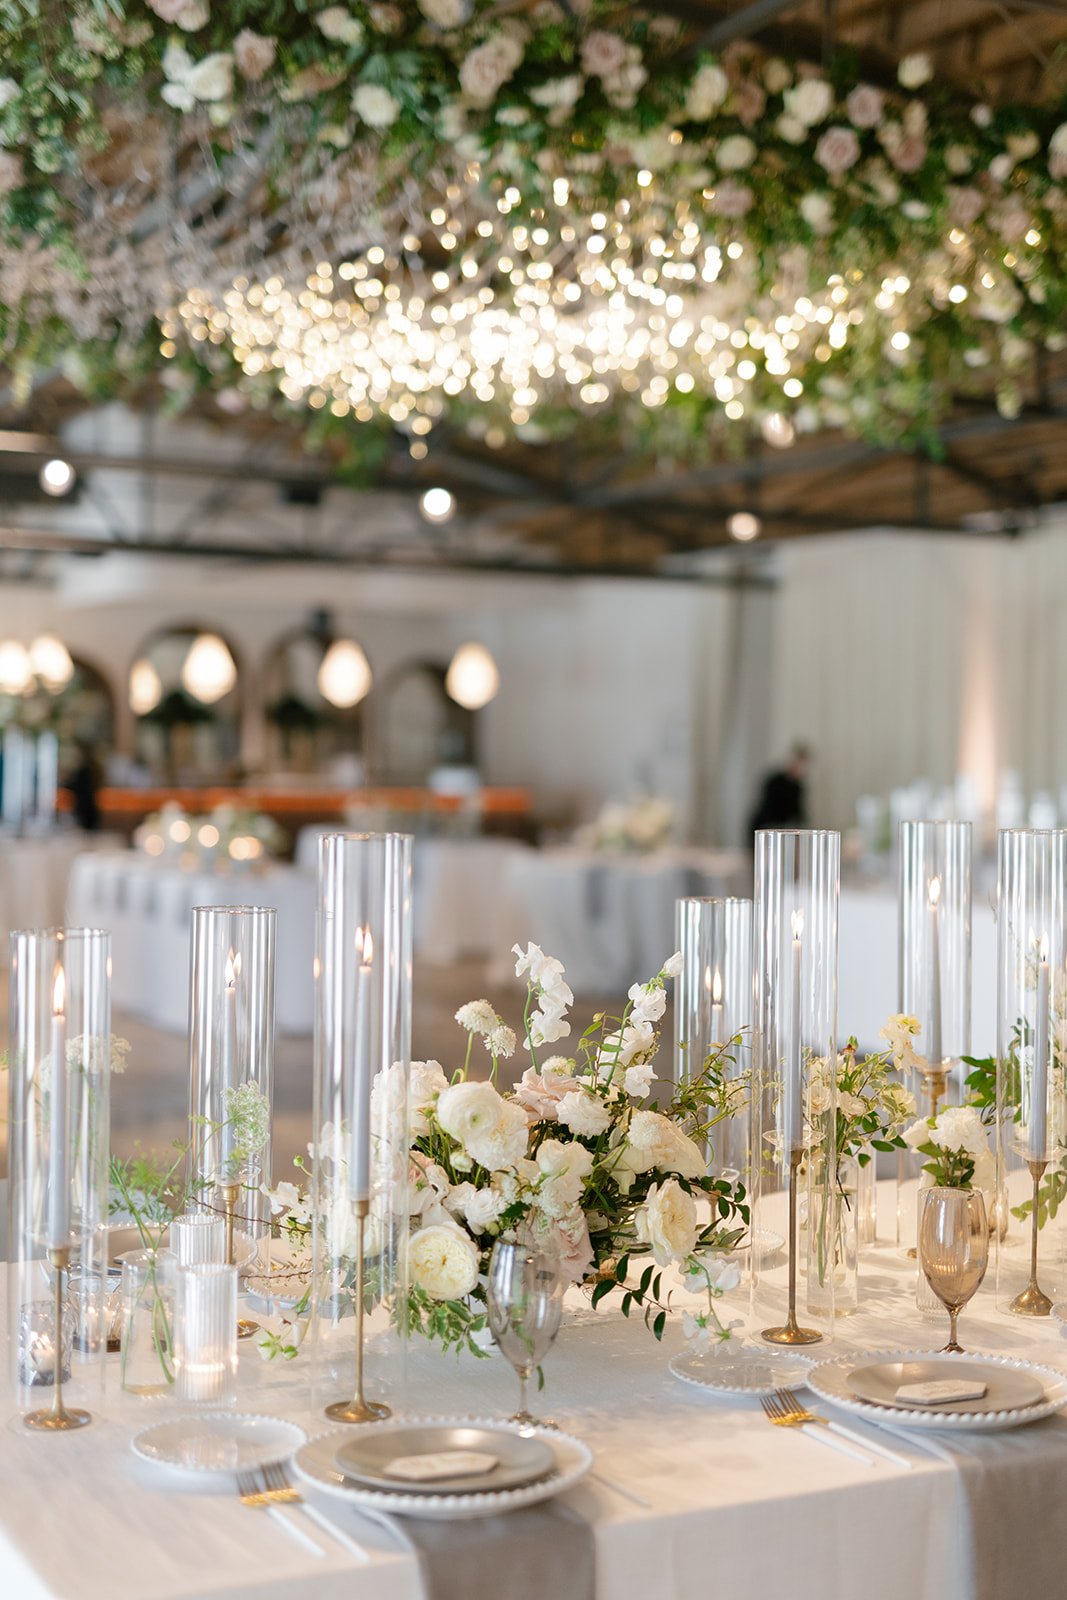 Low floral centerpieces for elegant wedding overflowing with white garden roses, ranunculus, butterfly ranunculus, scabiosa, lisianthus, sweet peas, and natural dark greenery. Floral hues of white, cream, and blush. Designed by Rosemary and Finch in